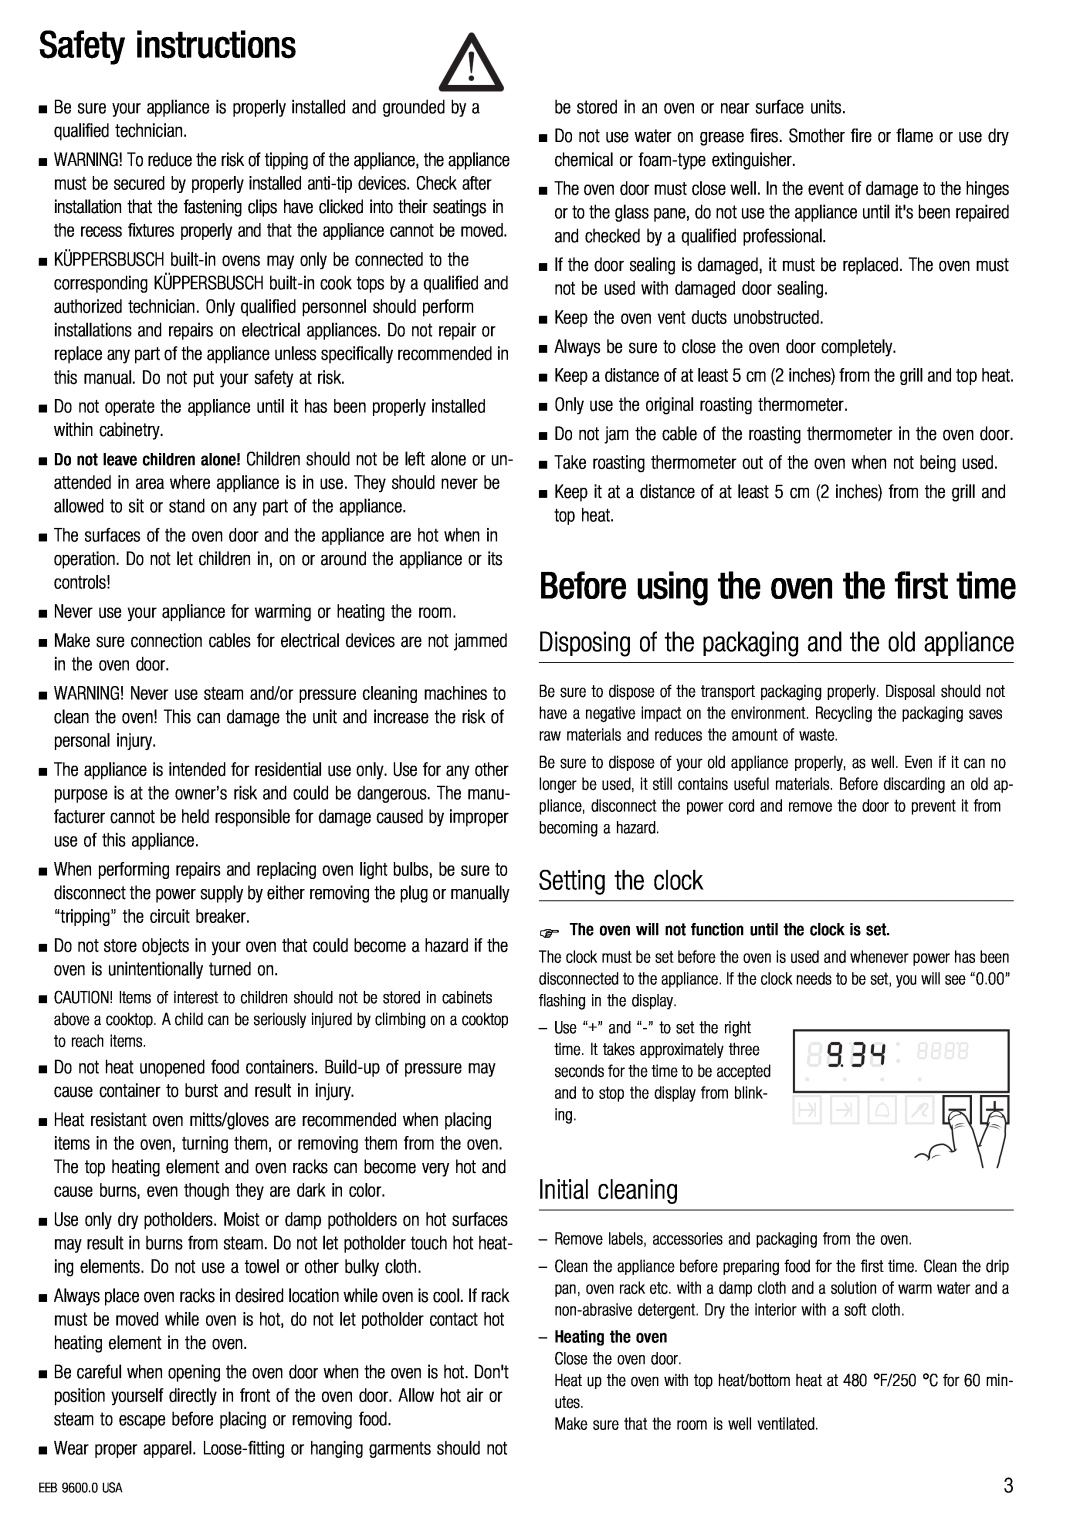 Kuppersbusch USA EEB 9600.0 Safety instructions, Setting the clock, Initial cleaning, Before using the oven the first time 